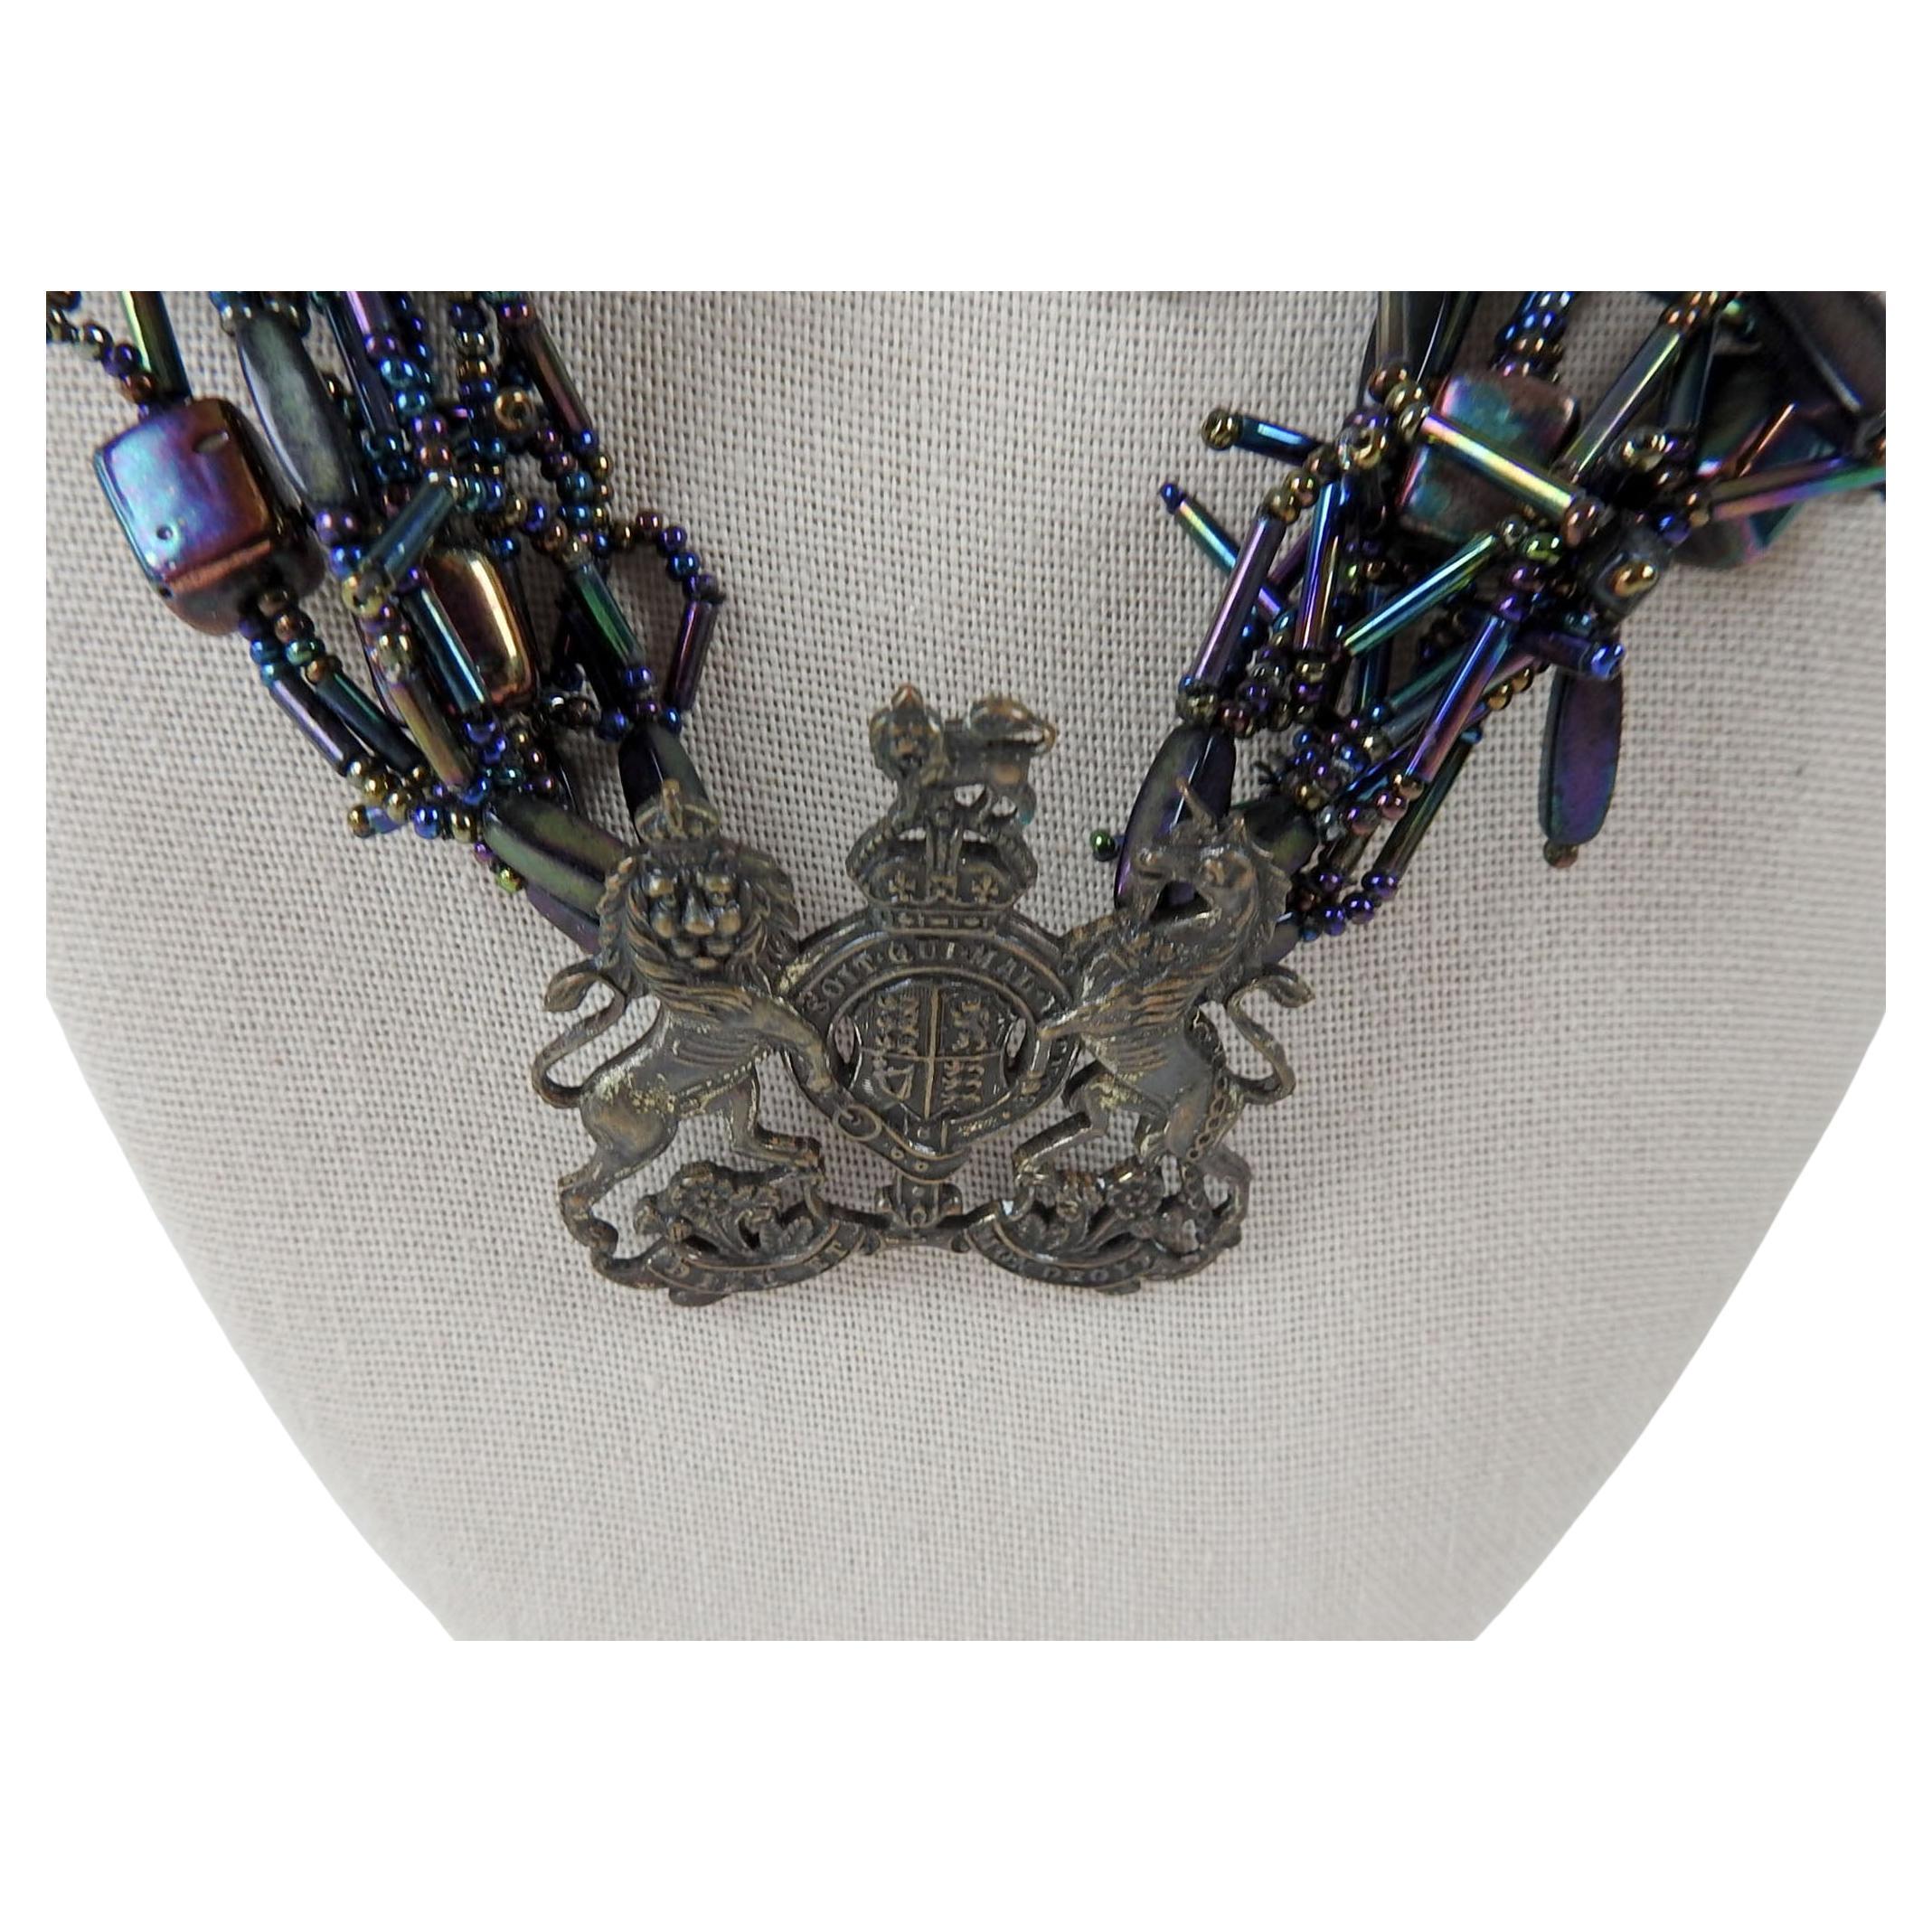 1990's Artist studio made multistrand beaded necklace using purple iridescent beads of various shapes and vintage brass British royal crest. By Linda Thompson (20th/21st century) Texas, 20